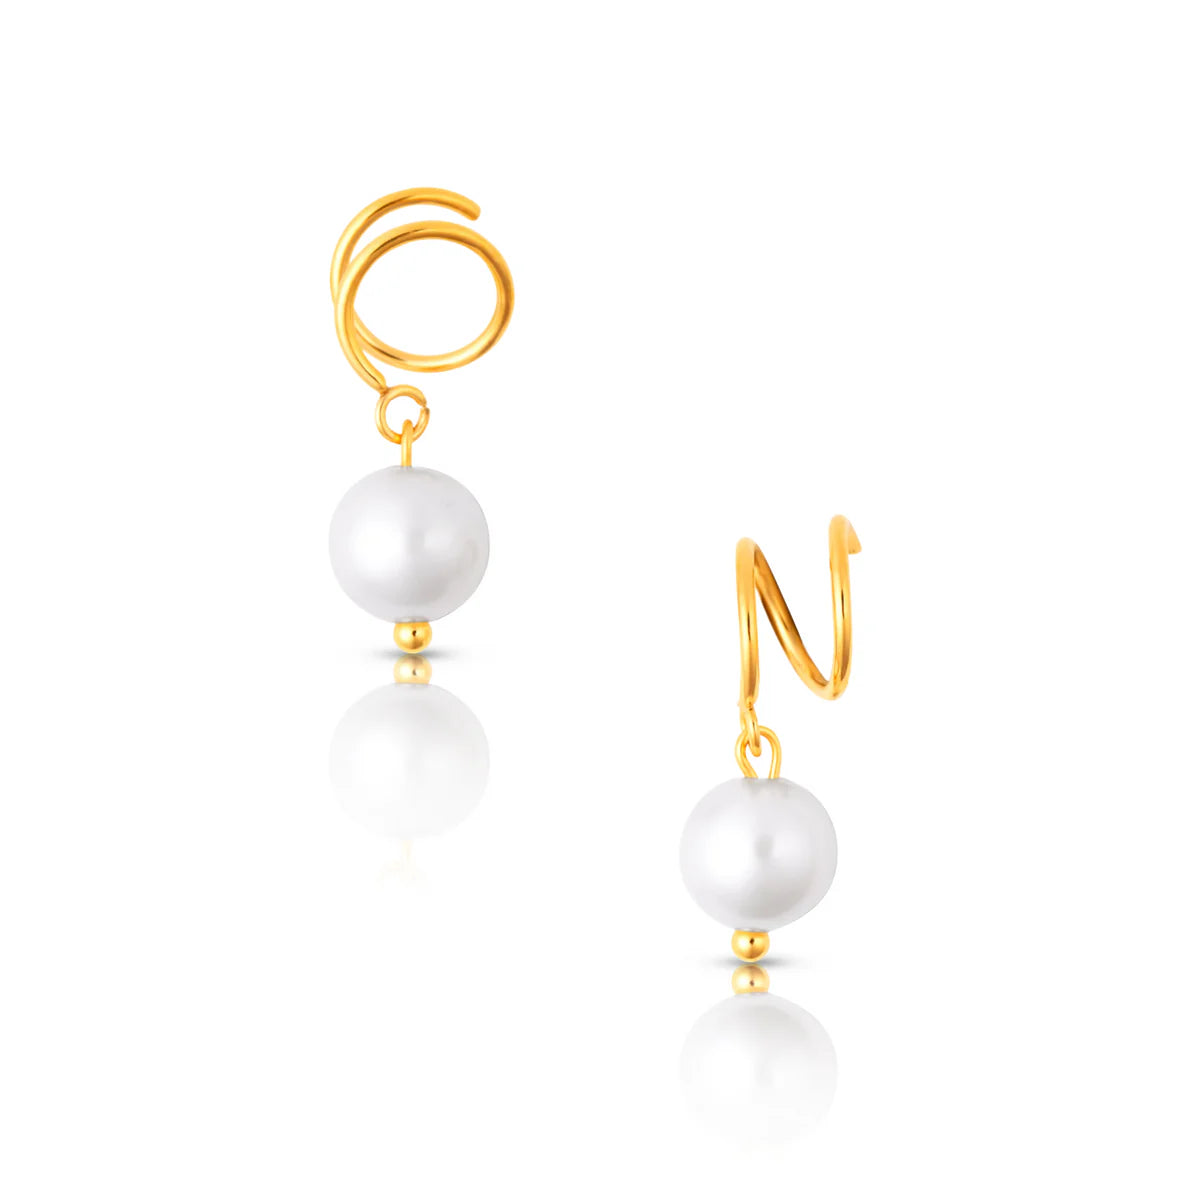 Cove Spiral Pearl Earring, Earring Jewelry by Ellie Vail | LIT Boutique